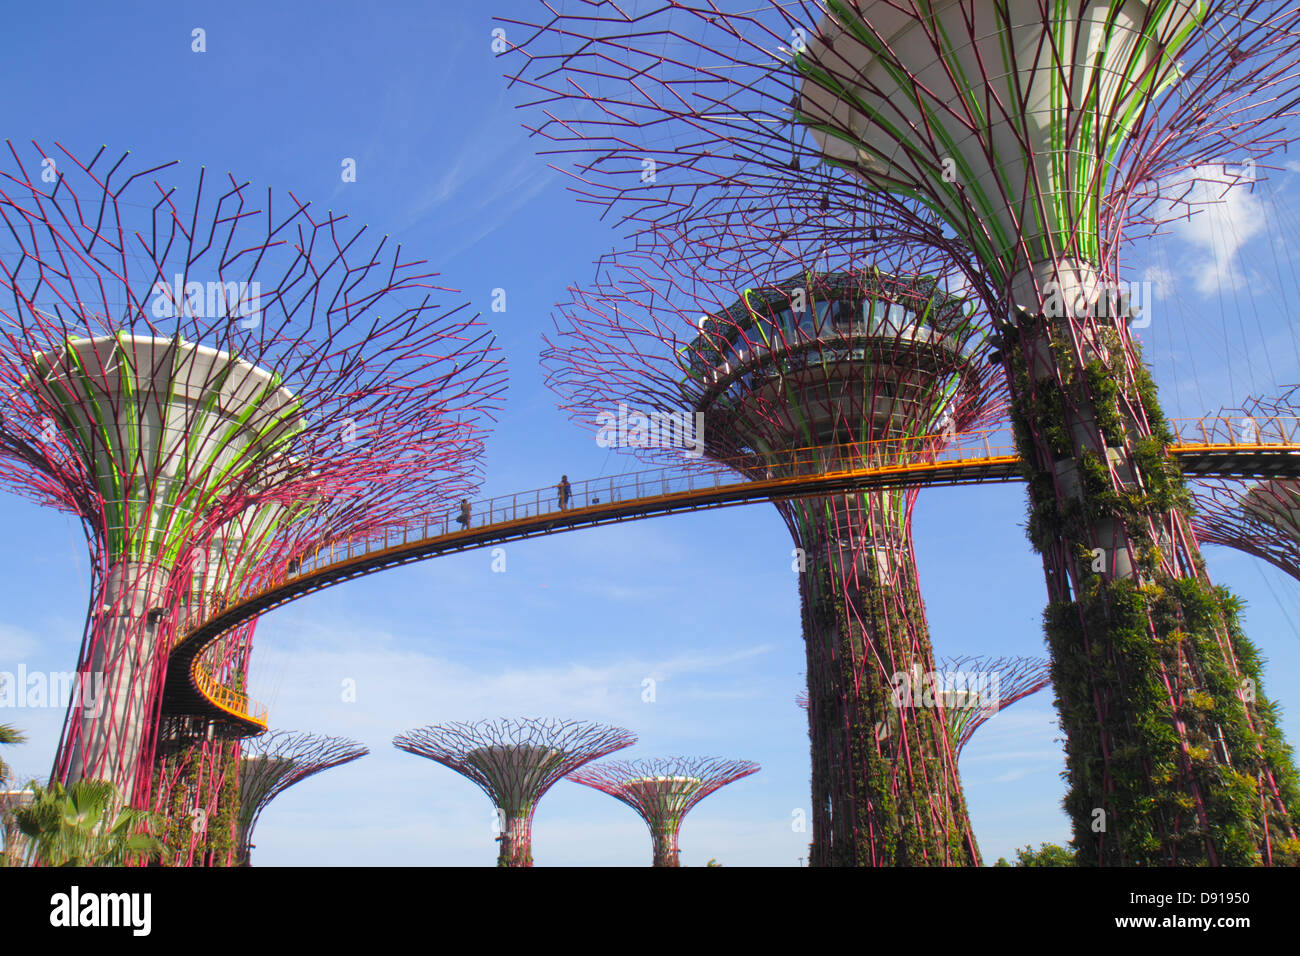 Singapore Gardens by the Bay,park,Supertrees,elevated walkway,Sing130202175 Stock Photo